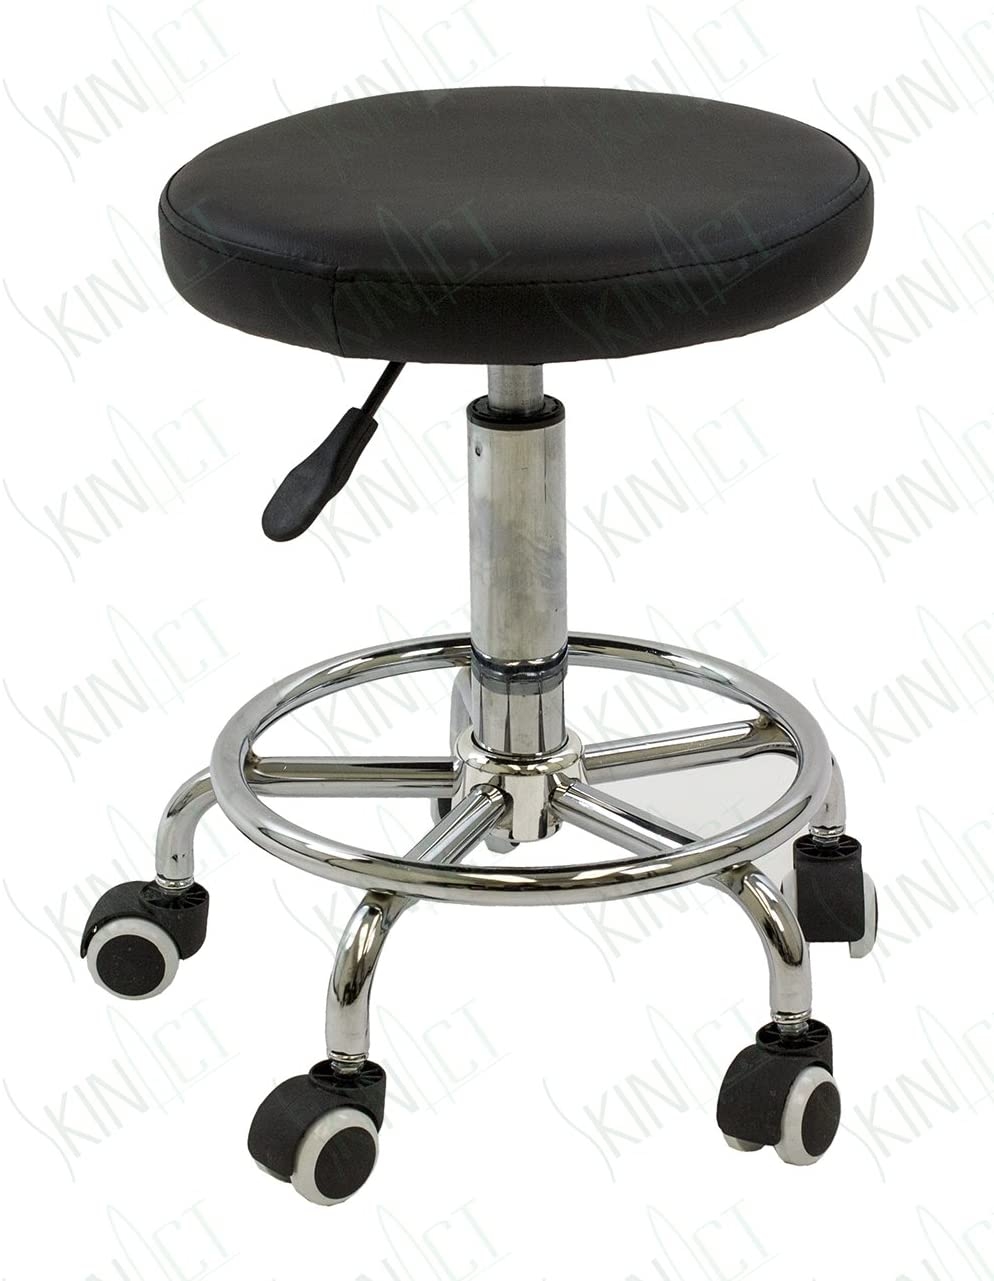 Hydraulic Stool Multi-purpose Black Hydraulic Adjustable Rolling Stool w/ Foot Rest for Massage Tables, Examination Tables, Office, Medical and Home Use